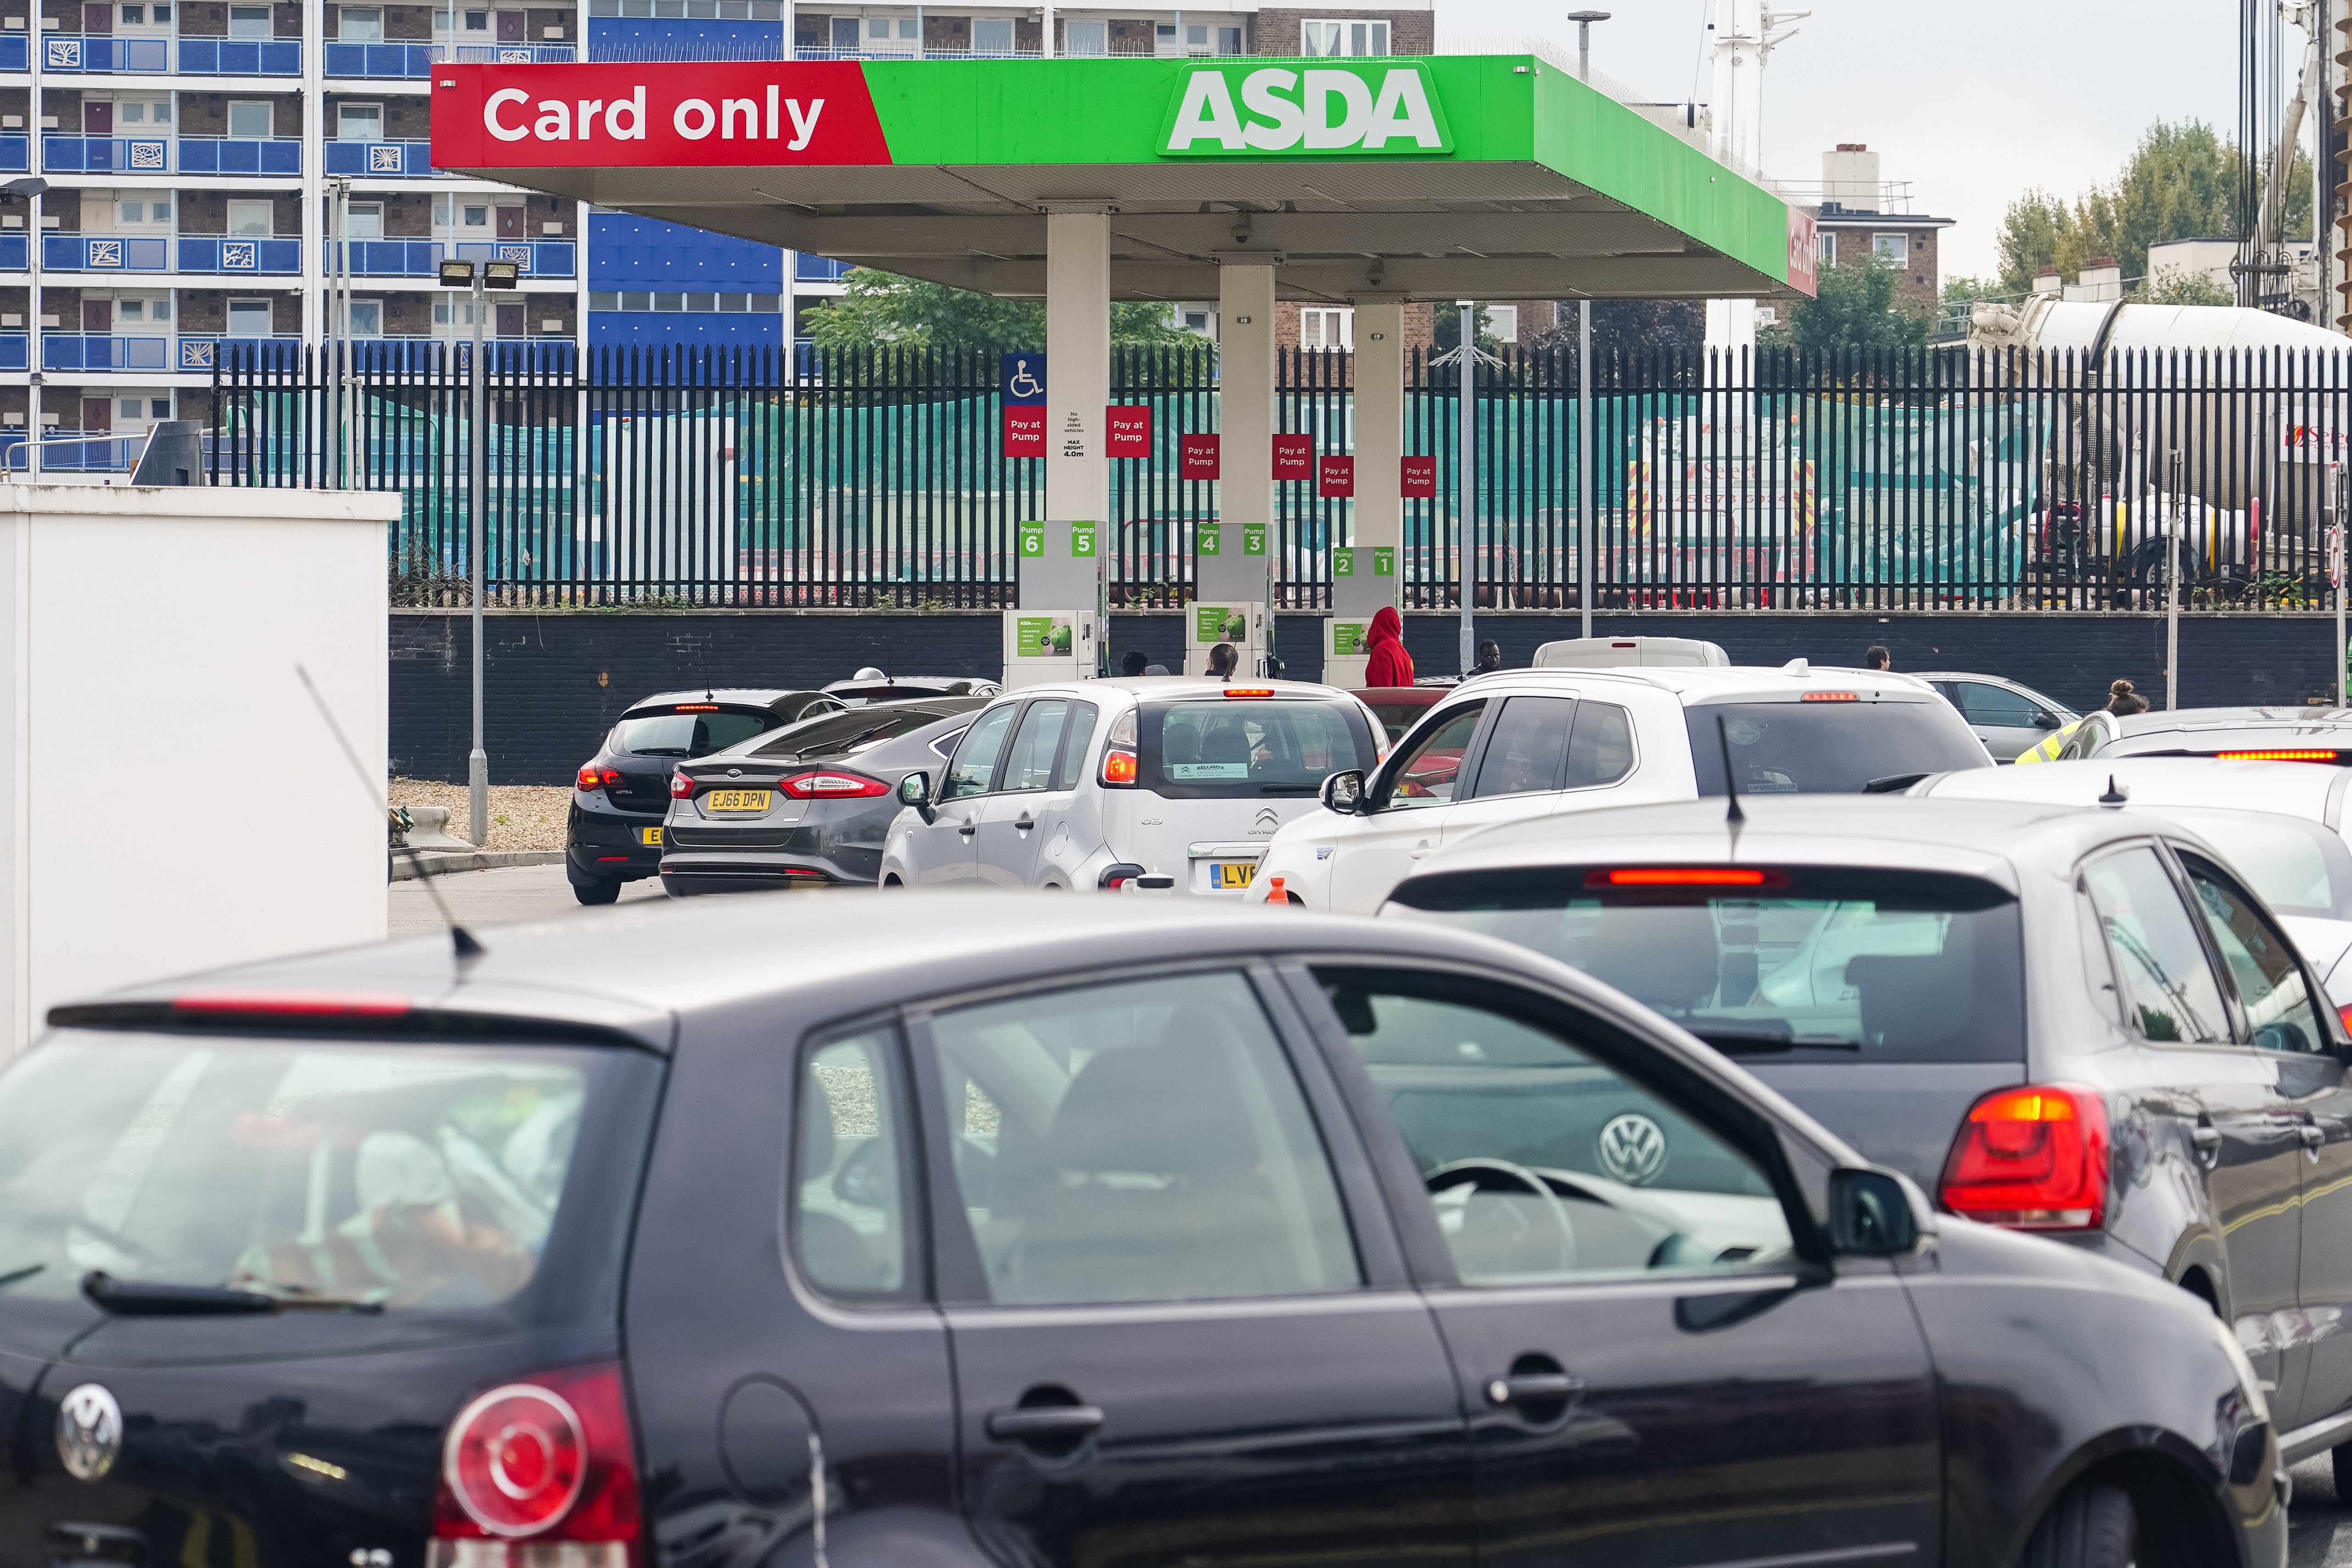 Cars queue for fuel at an Asda petrol station in south London amid continued panic buying (Dominic Lipinski/PA)